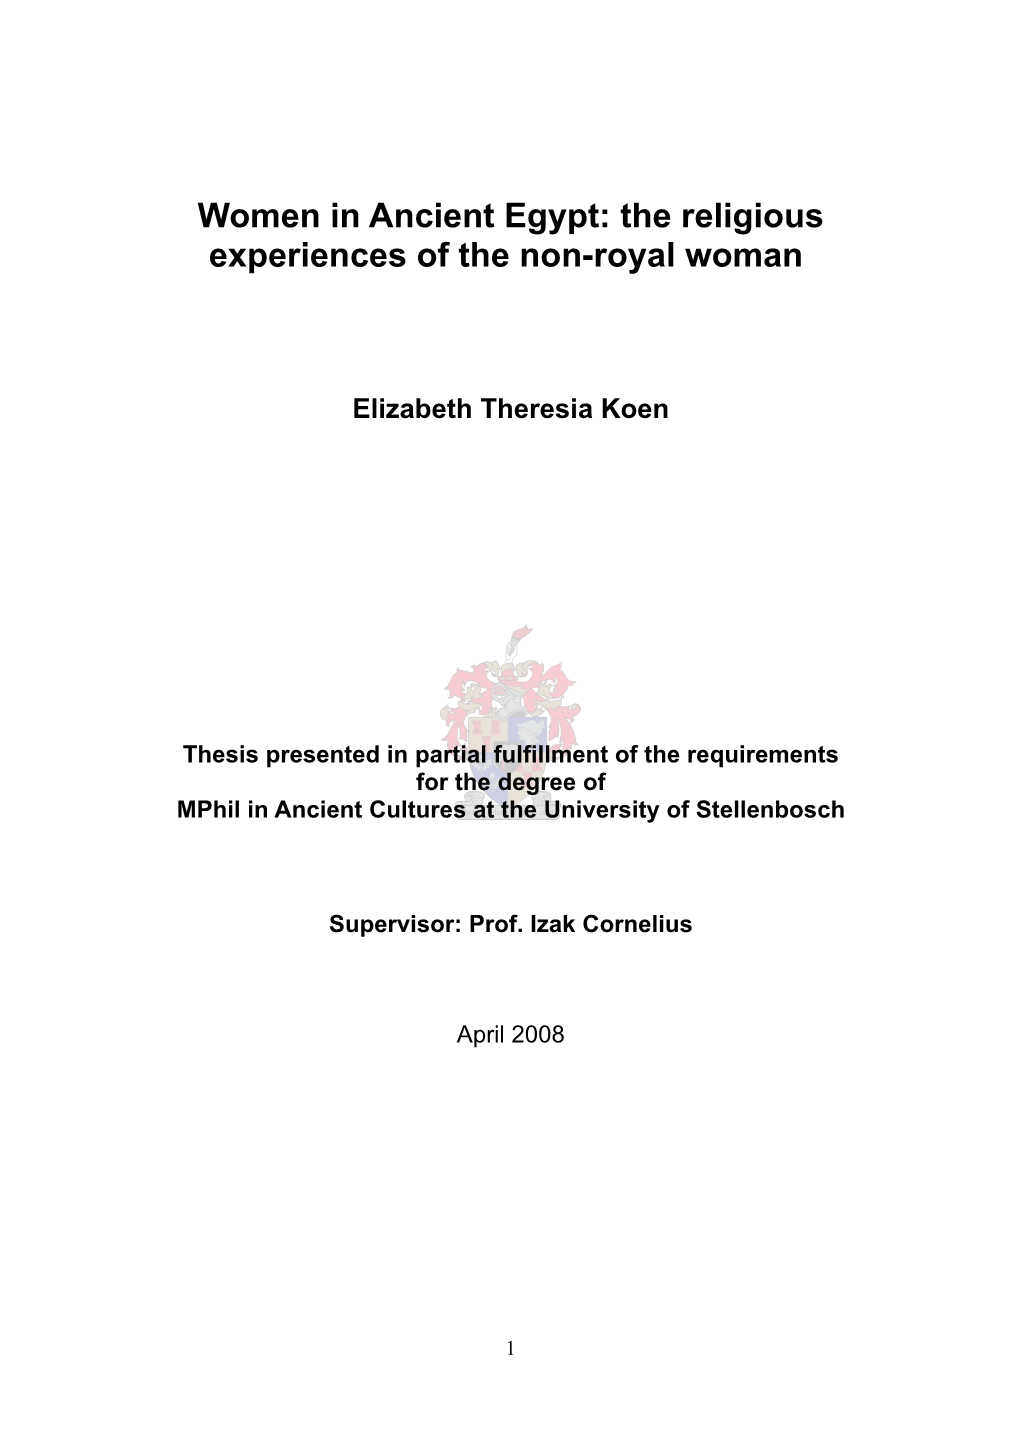 Women in Ancient Egypt: the Religious Experiences of the Non-Royal Woman